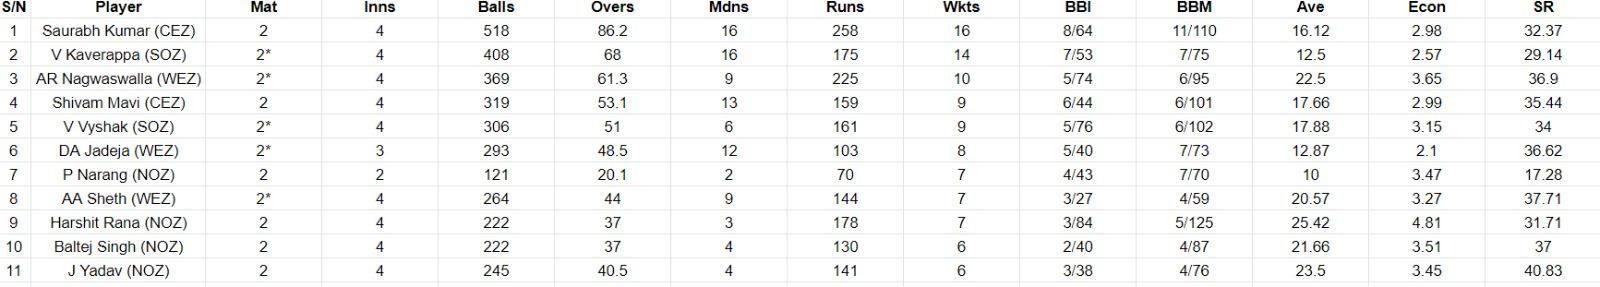 Most Wickets list after Day 4 of the Final